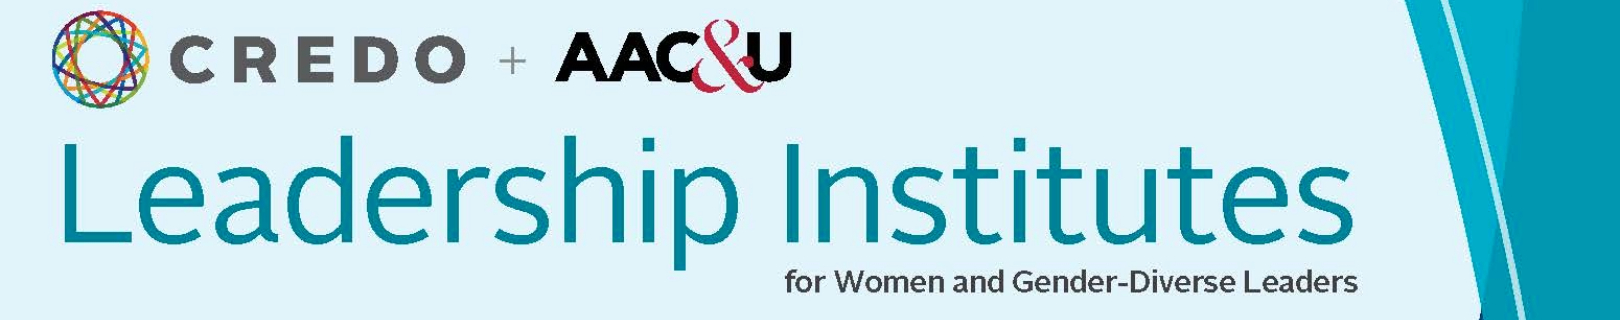 Credo + AAC&U Leadership Institutes for Women and Gender-Diverse Leaders